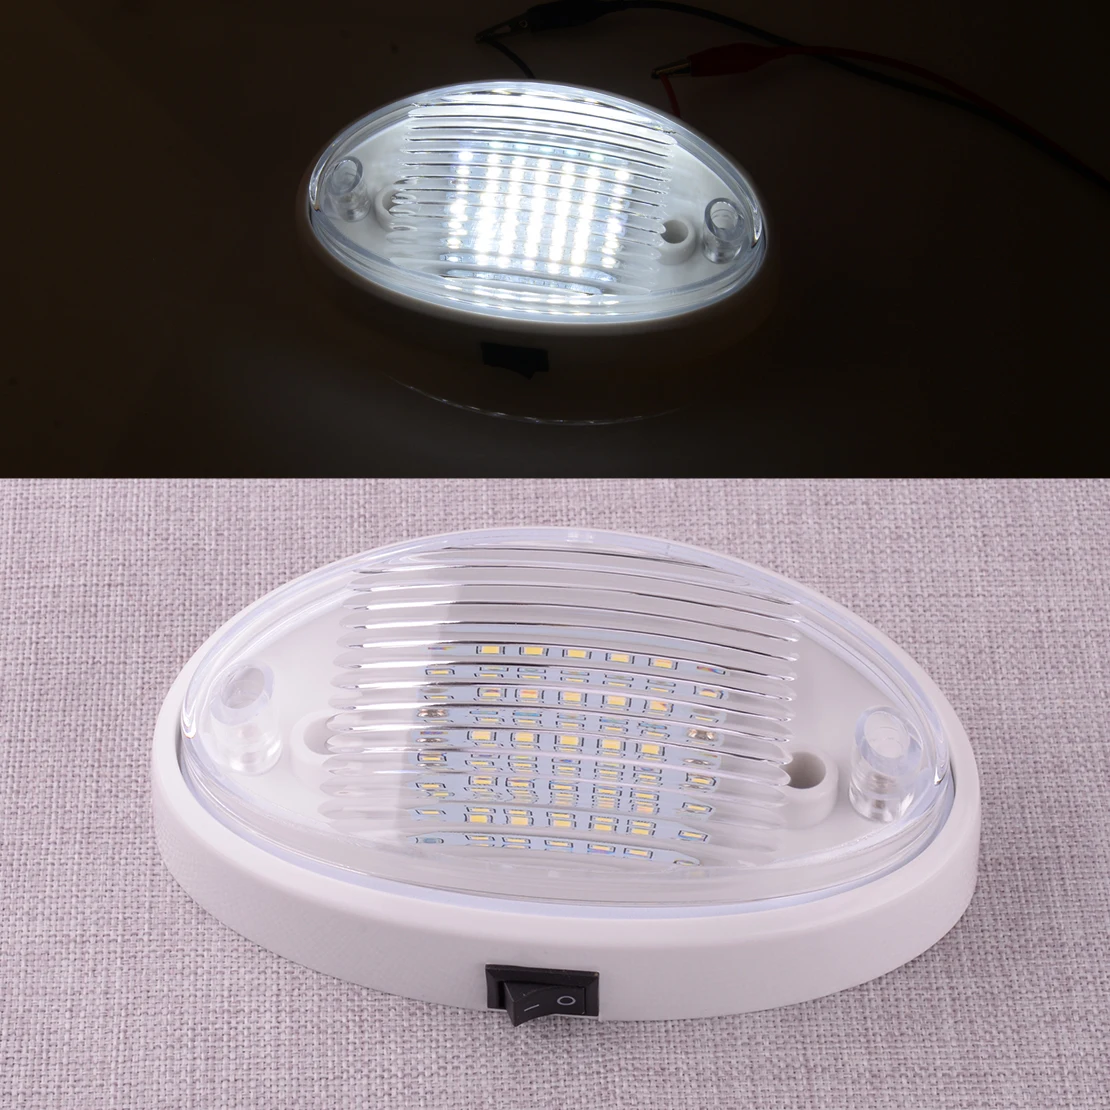 

12V Oval Ceiling Dome Light LED Lamp On-Off Switch Universal for RV Camper Motorhome Caravan Awning